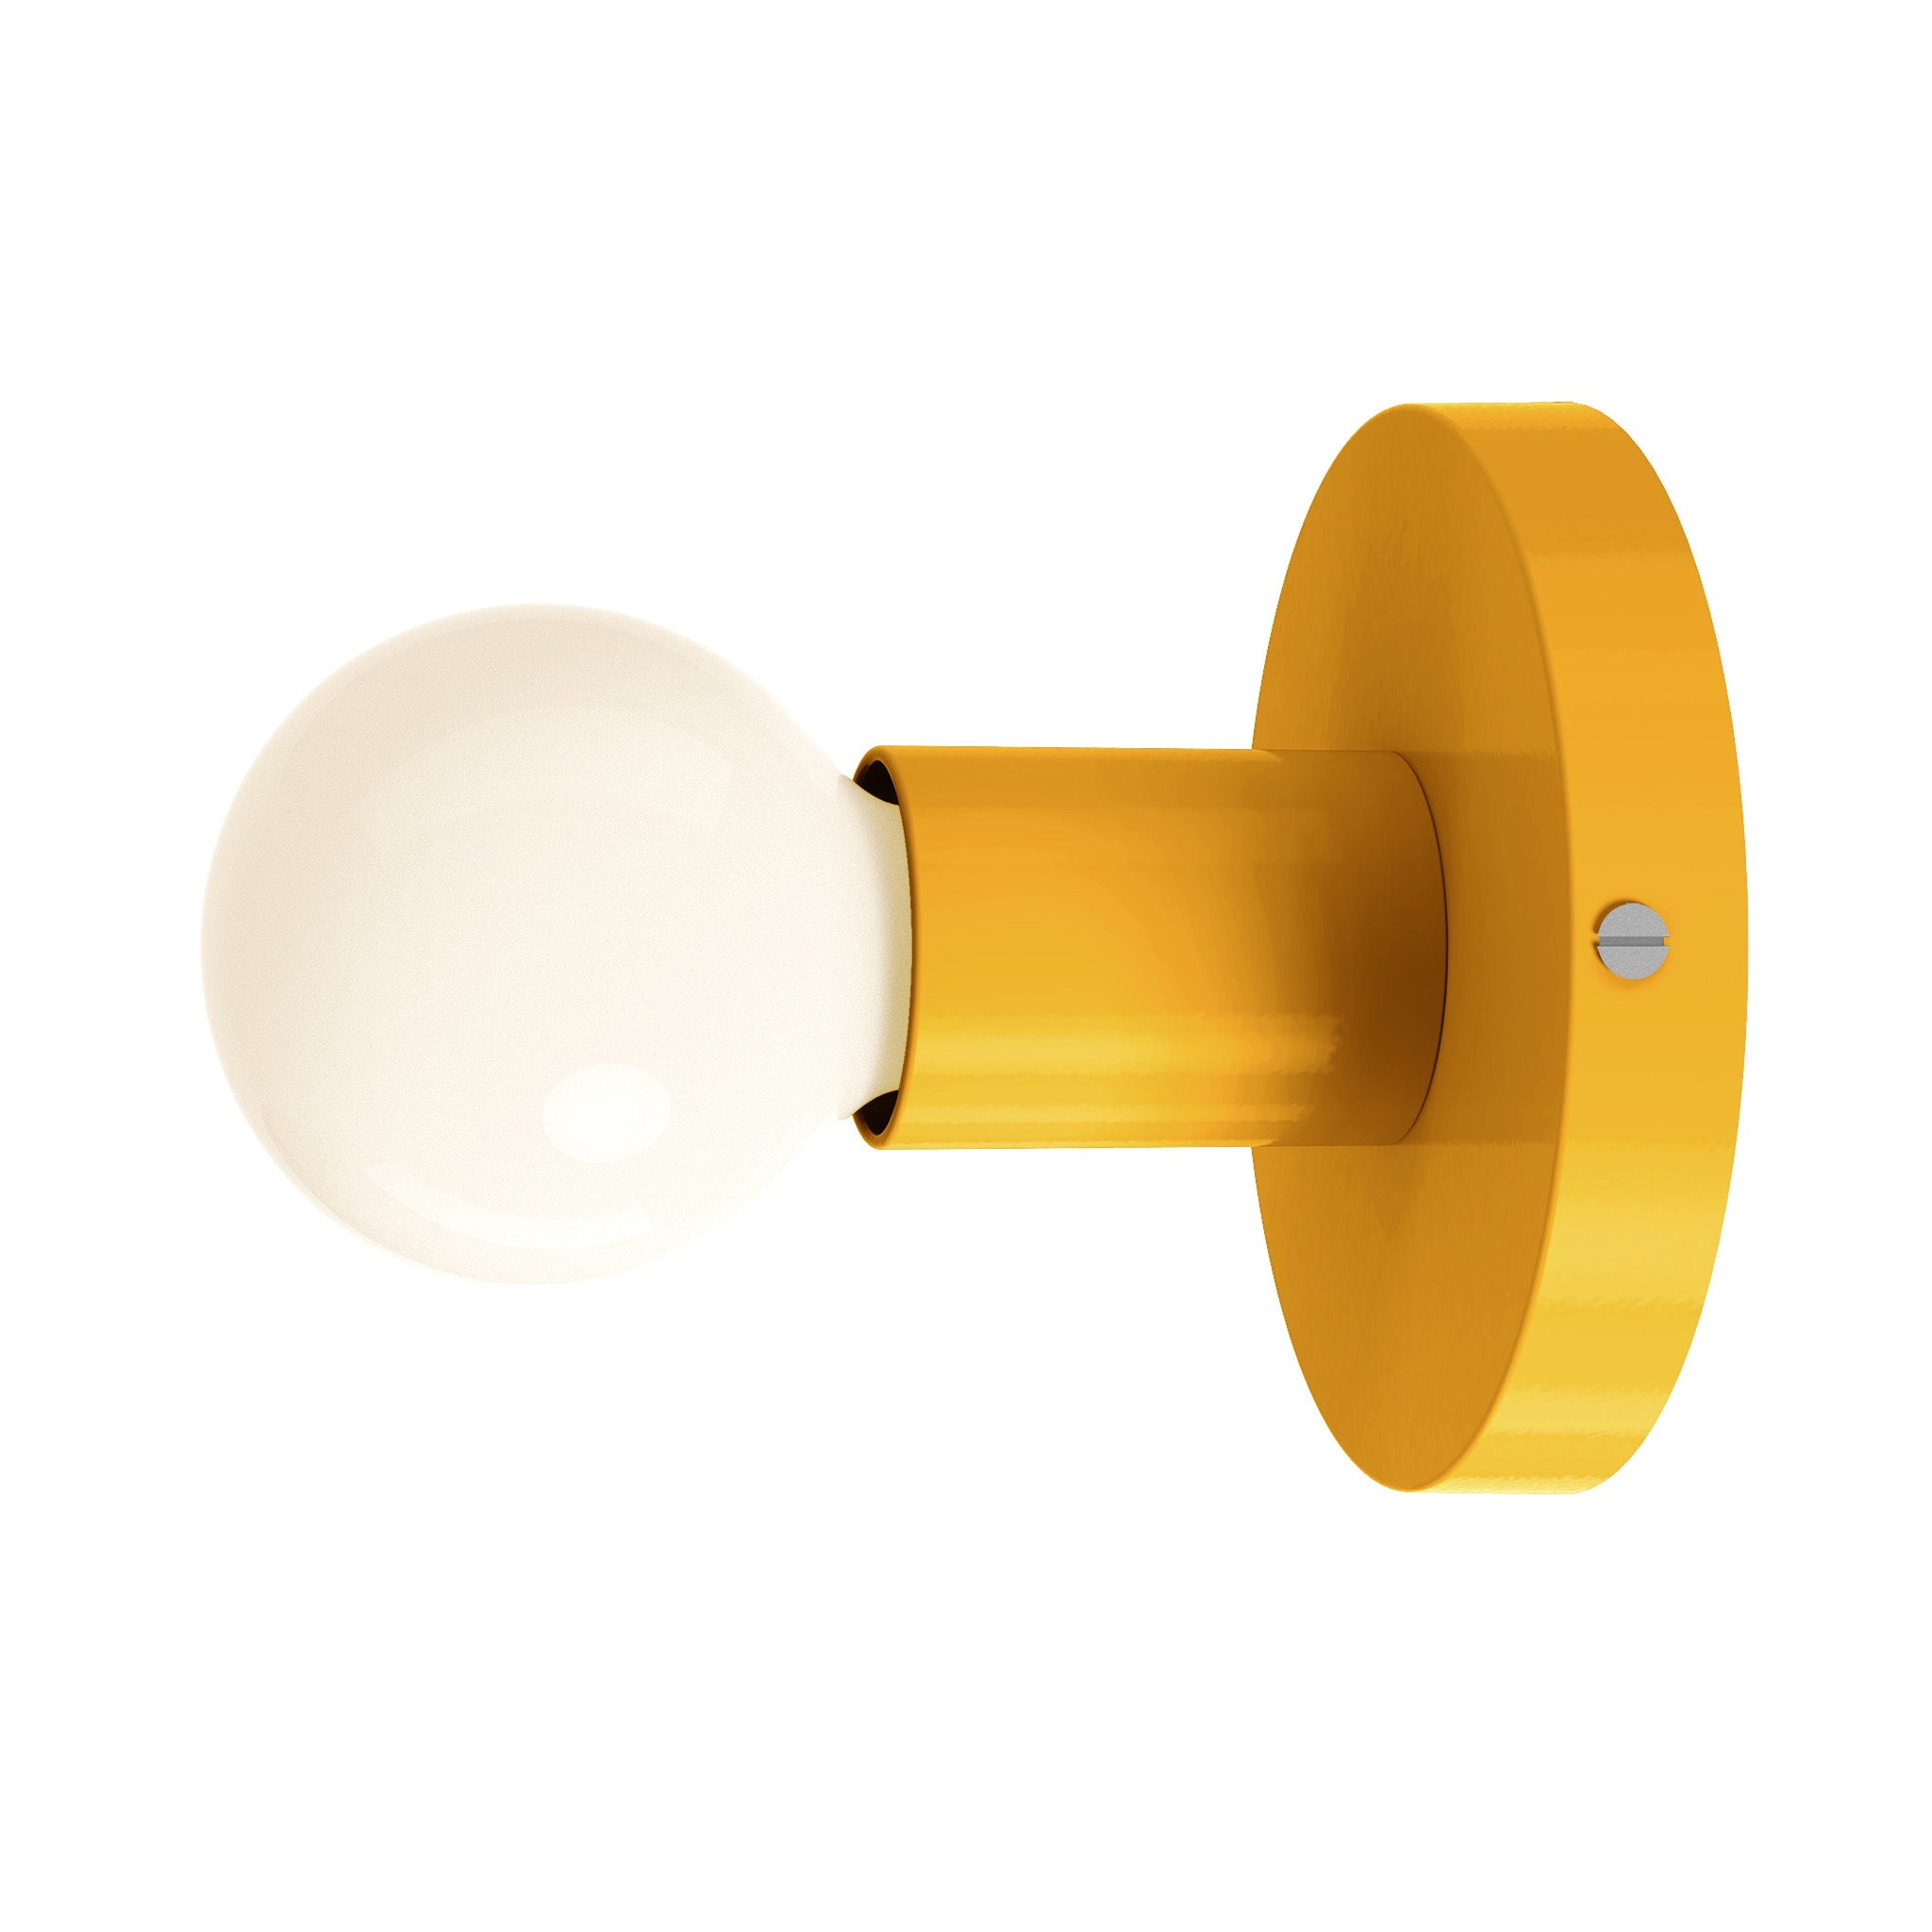 nickel ochre color twink sconce dutton brown lighting